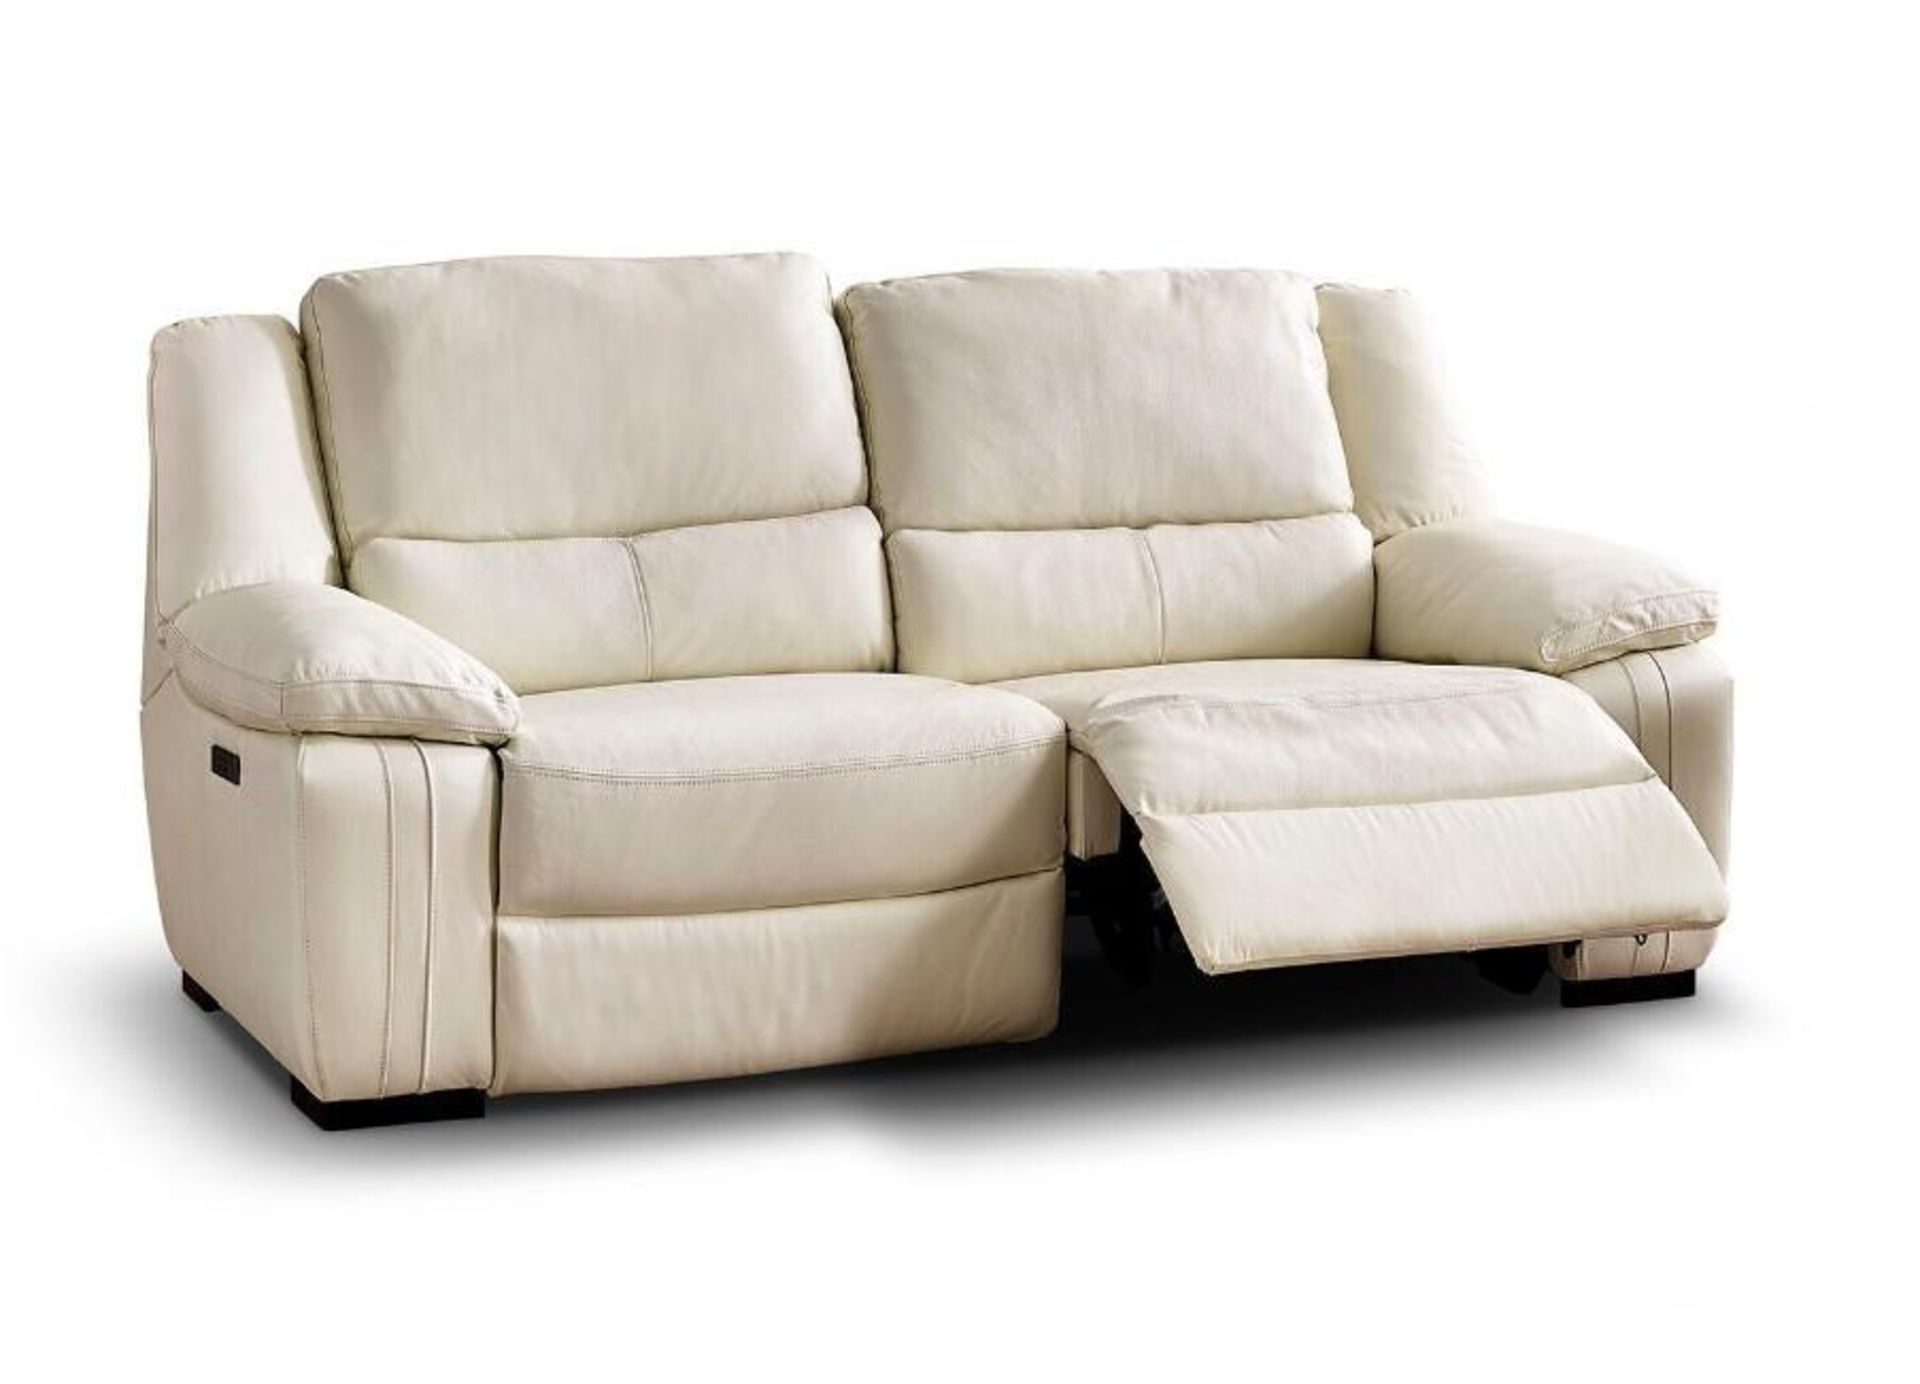 Brand new and boxed SCS Fallon 3 + 2 seater electric reclining sofa in Cream. - Image 6 of 7